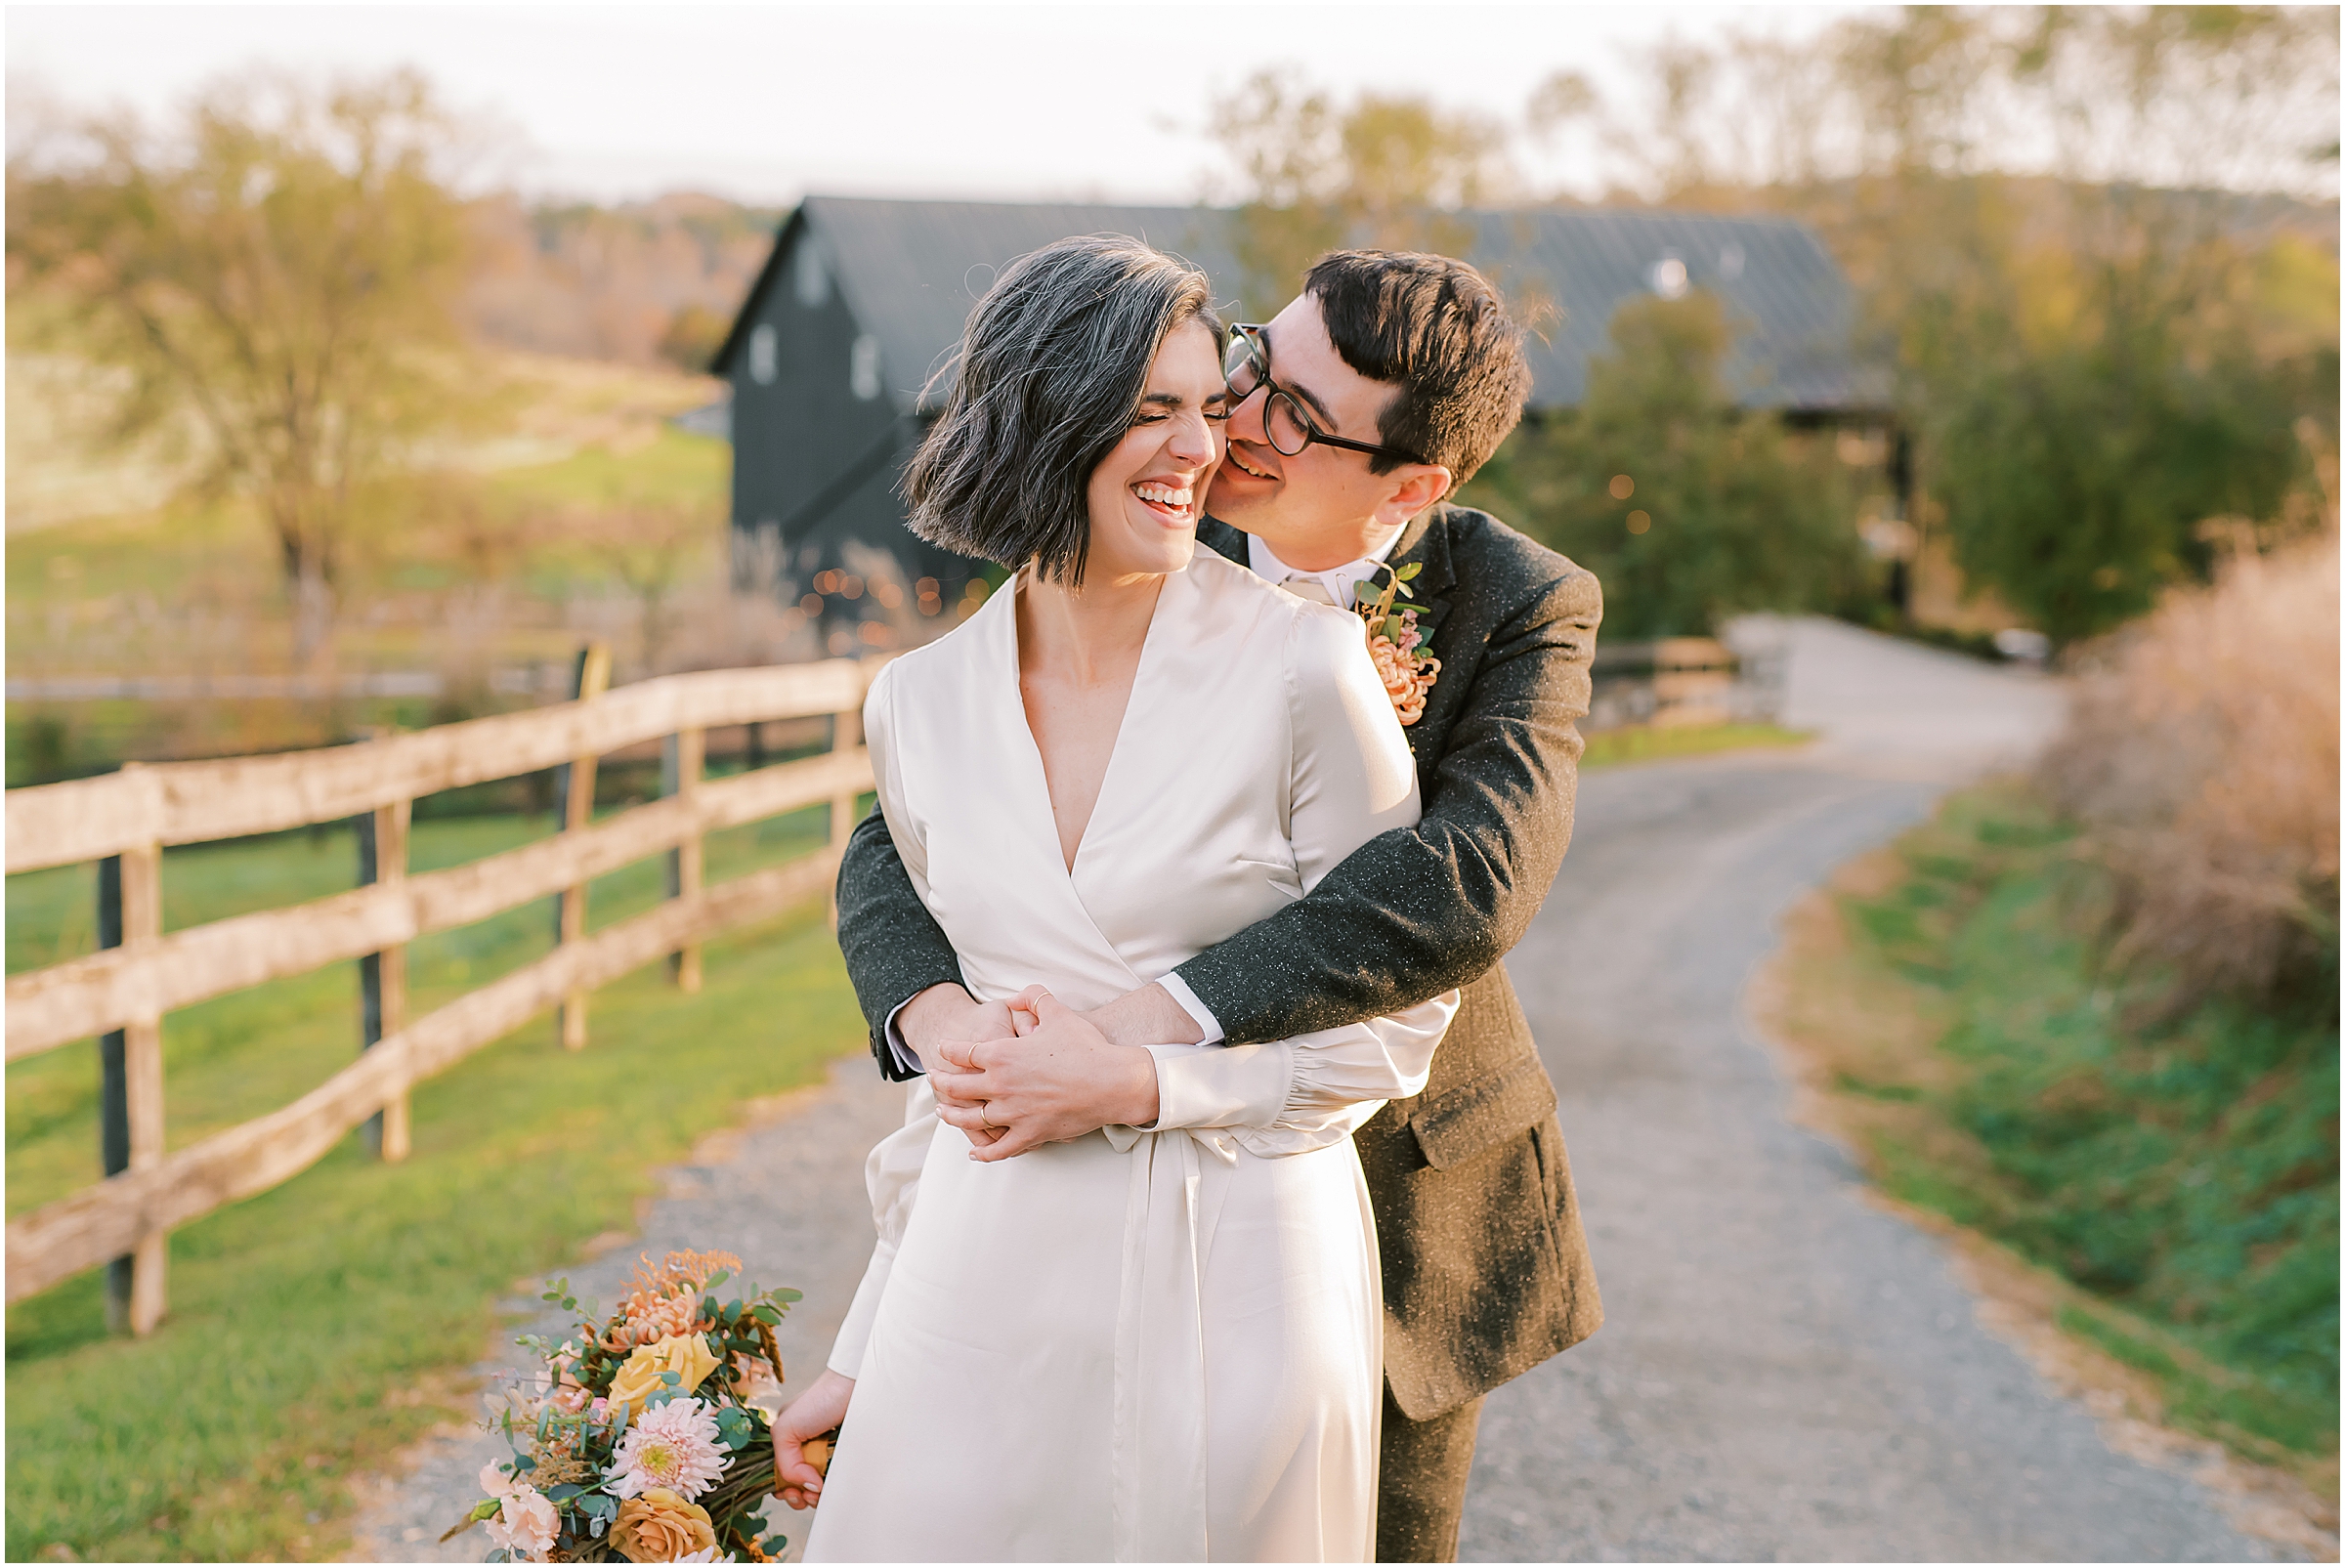 Newlyweds embracing during golden hour